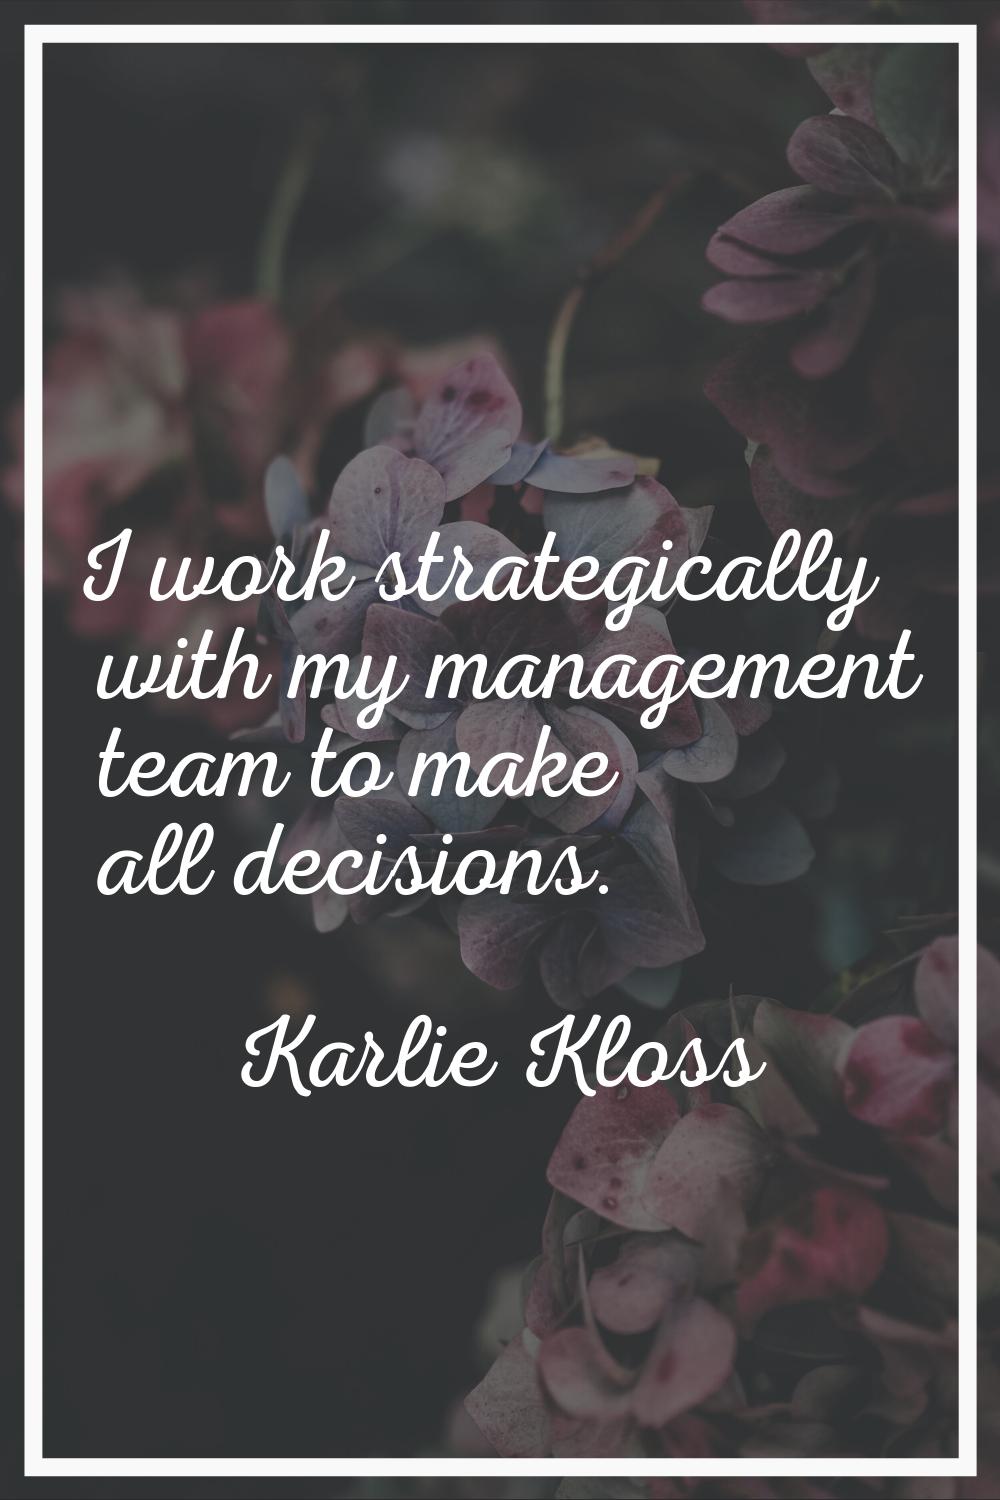 I work strategically with my management team to make all decisions.